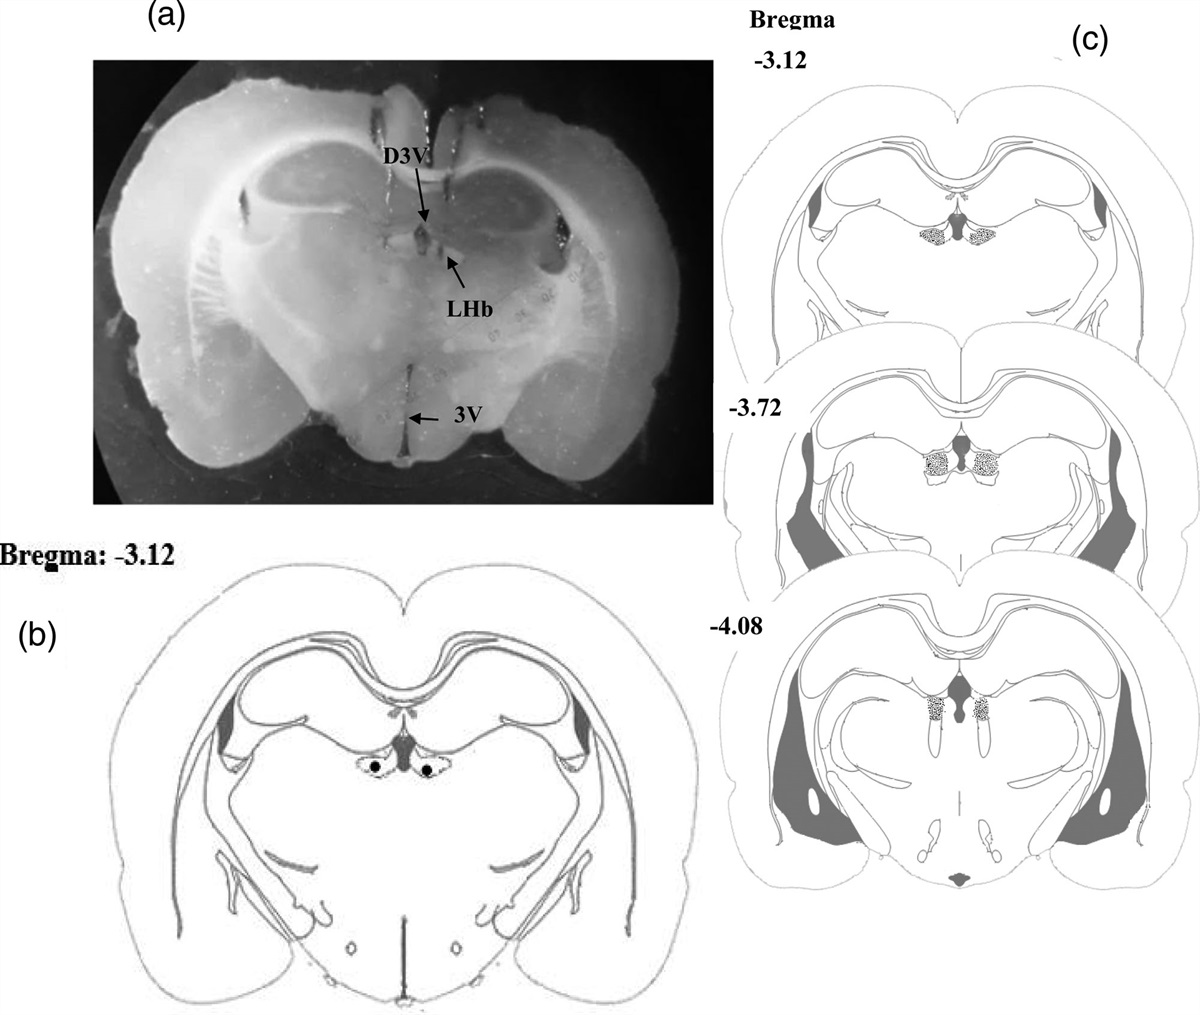 Involvement of GABAA receptors of lateral habenula in the acquisition and expression phases of morphine-induced place preference in male rats